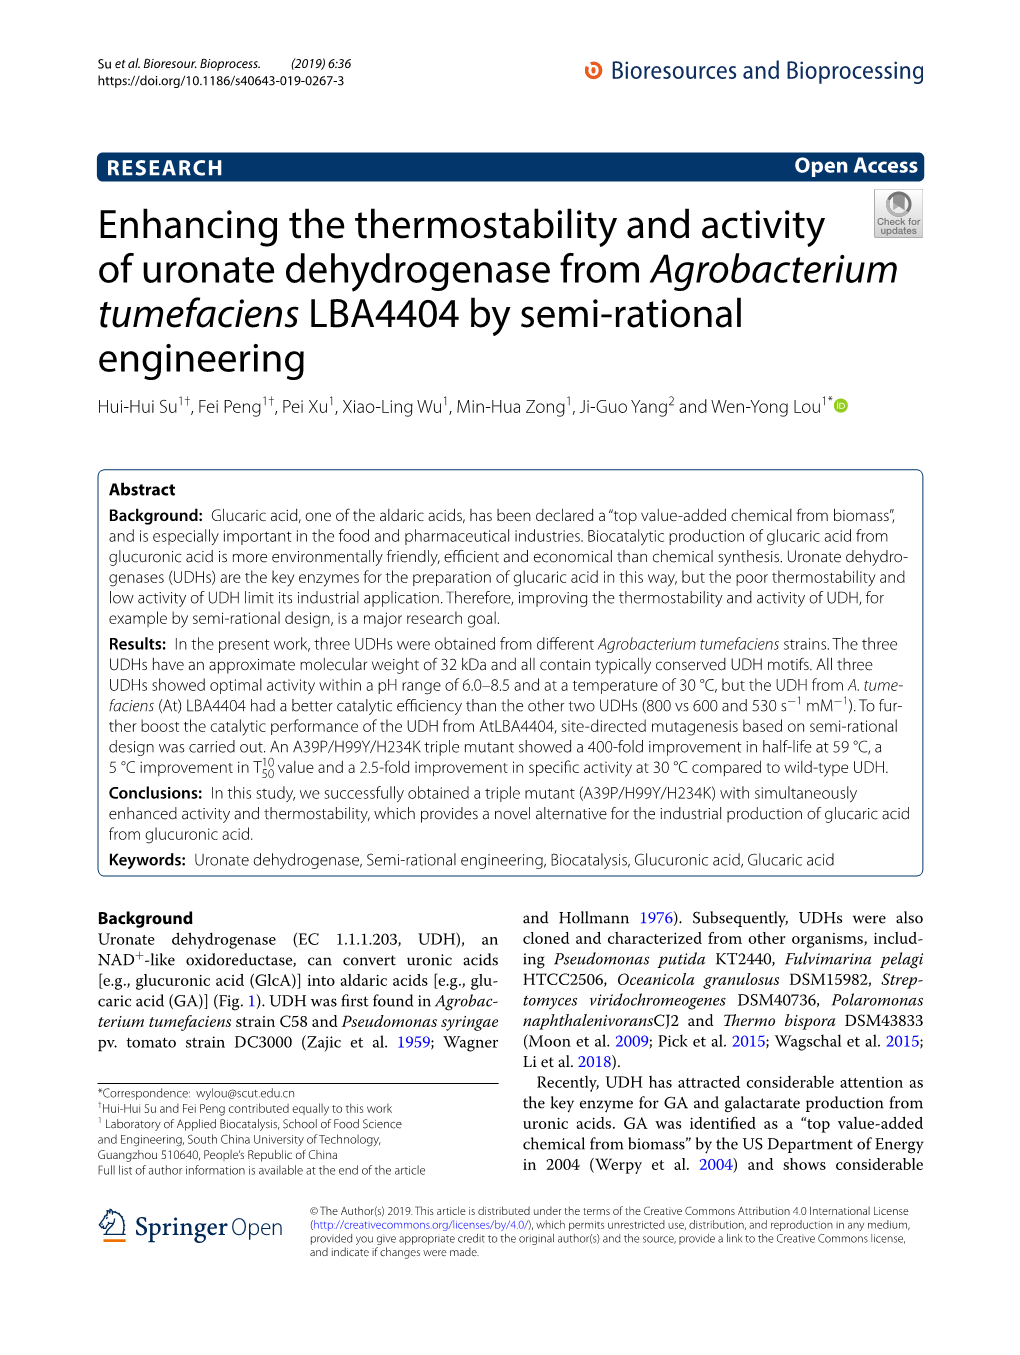 Enhancing the Thermostability and Activity of Uronate Dehydrogenase from Agrobacterium Tumefaciens LBA4404 by Semi-Rational Engi